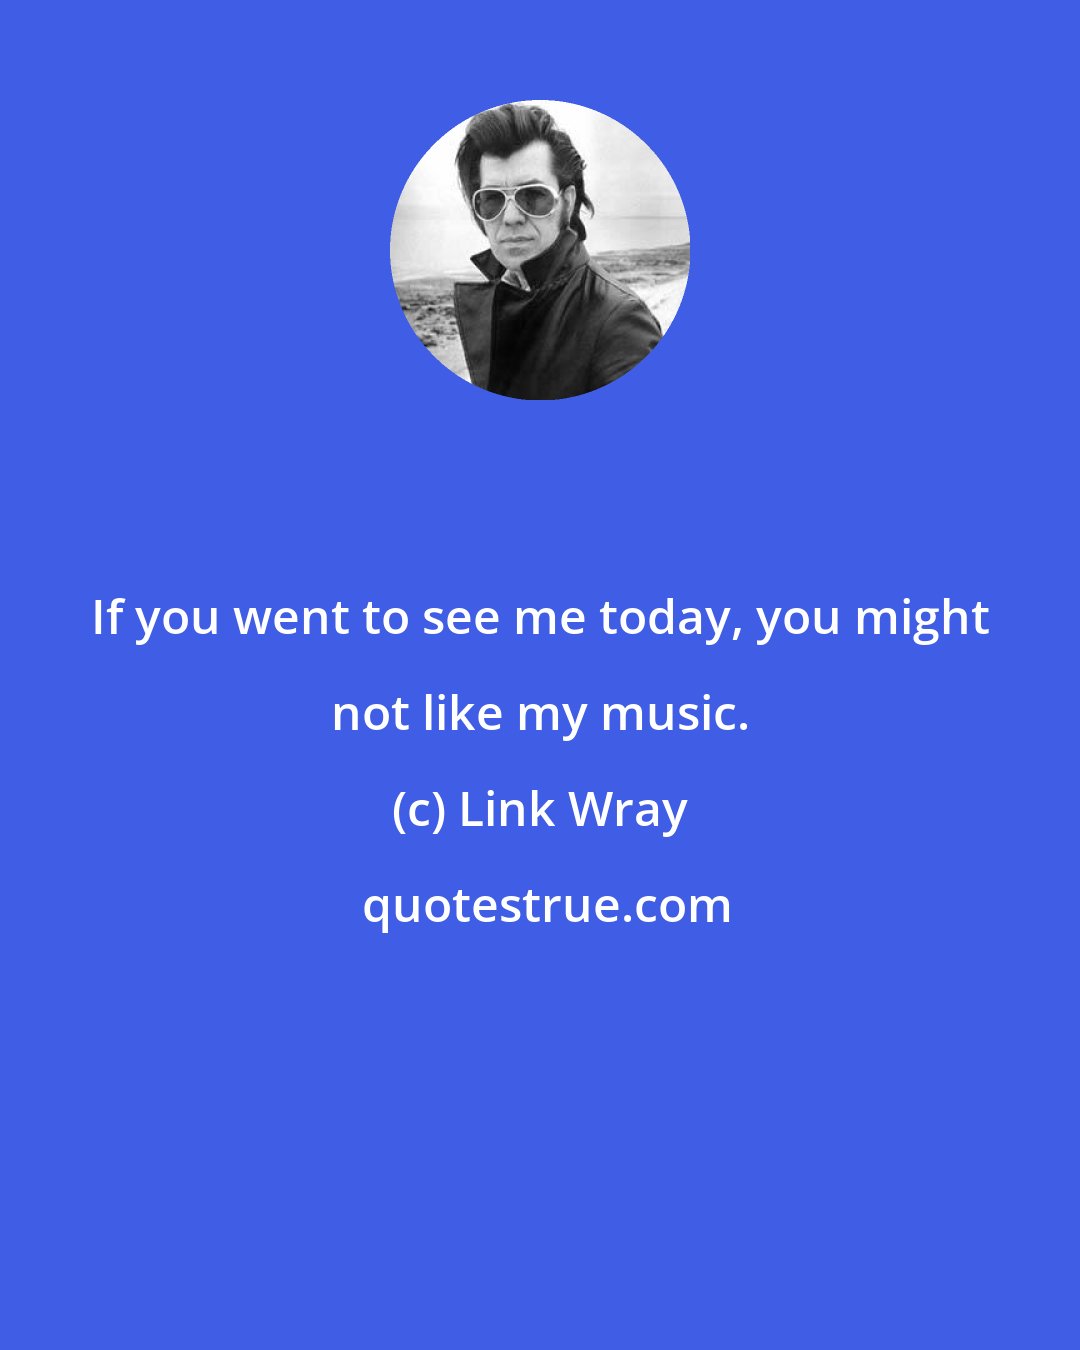 Link Wray: If you went to see me today, you might not like my music.